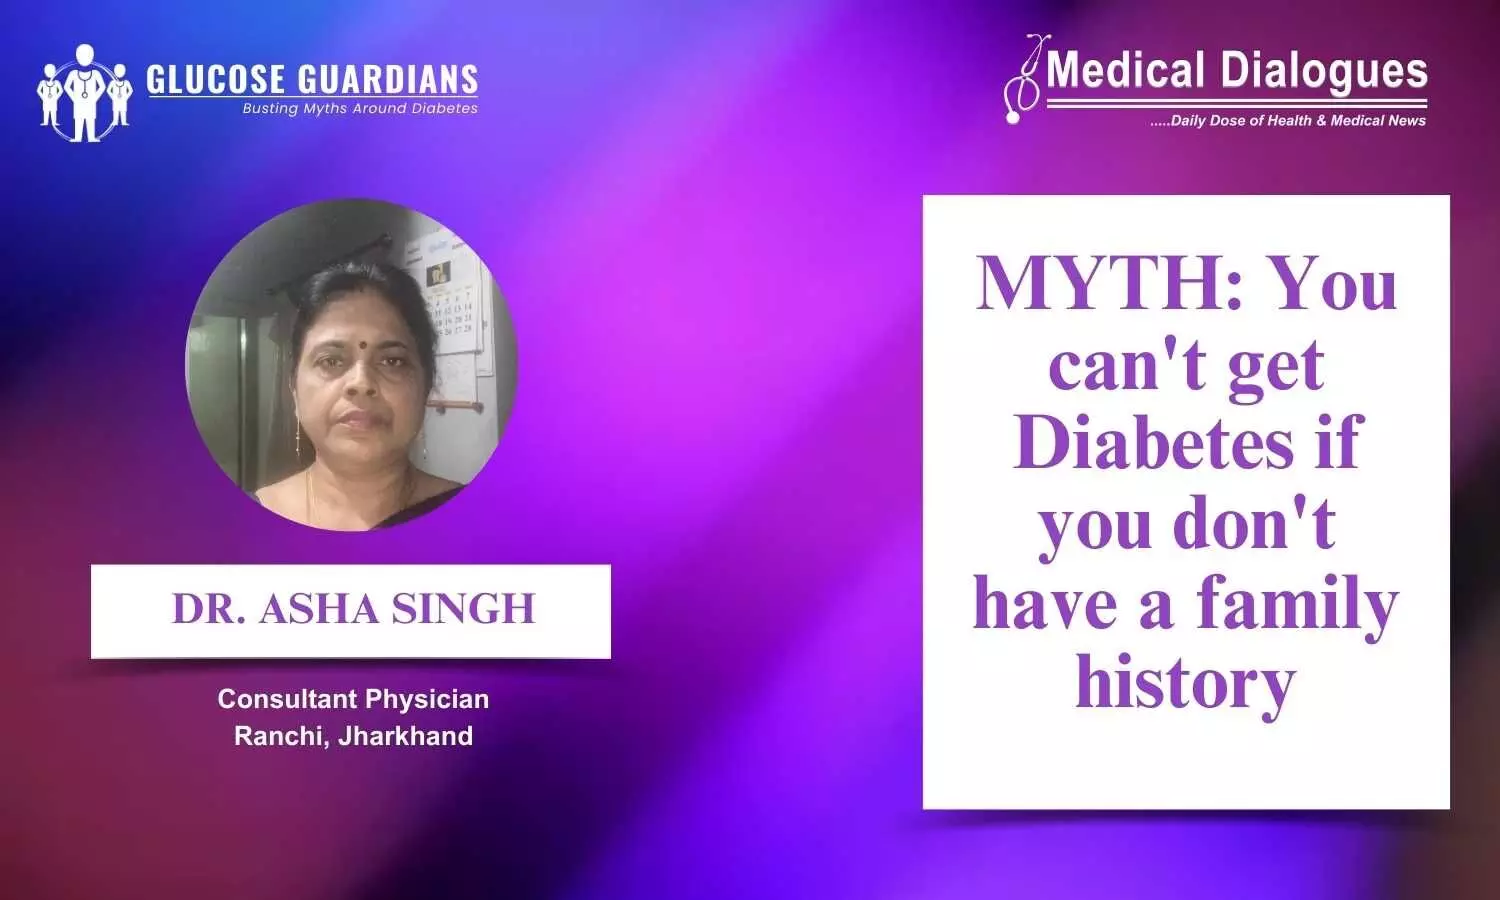 Myths Related to Diabetes Risk: Examining the Role of Family History - Dr Asha Singh